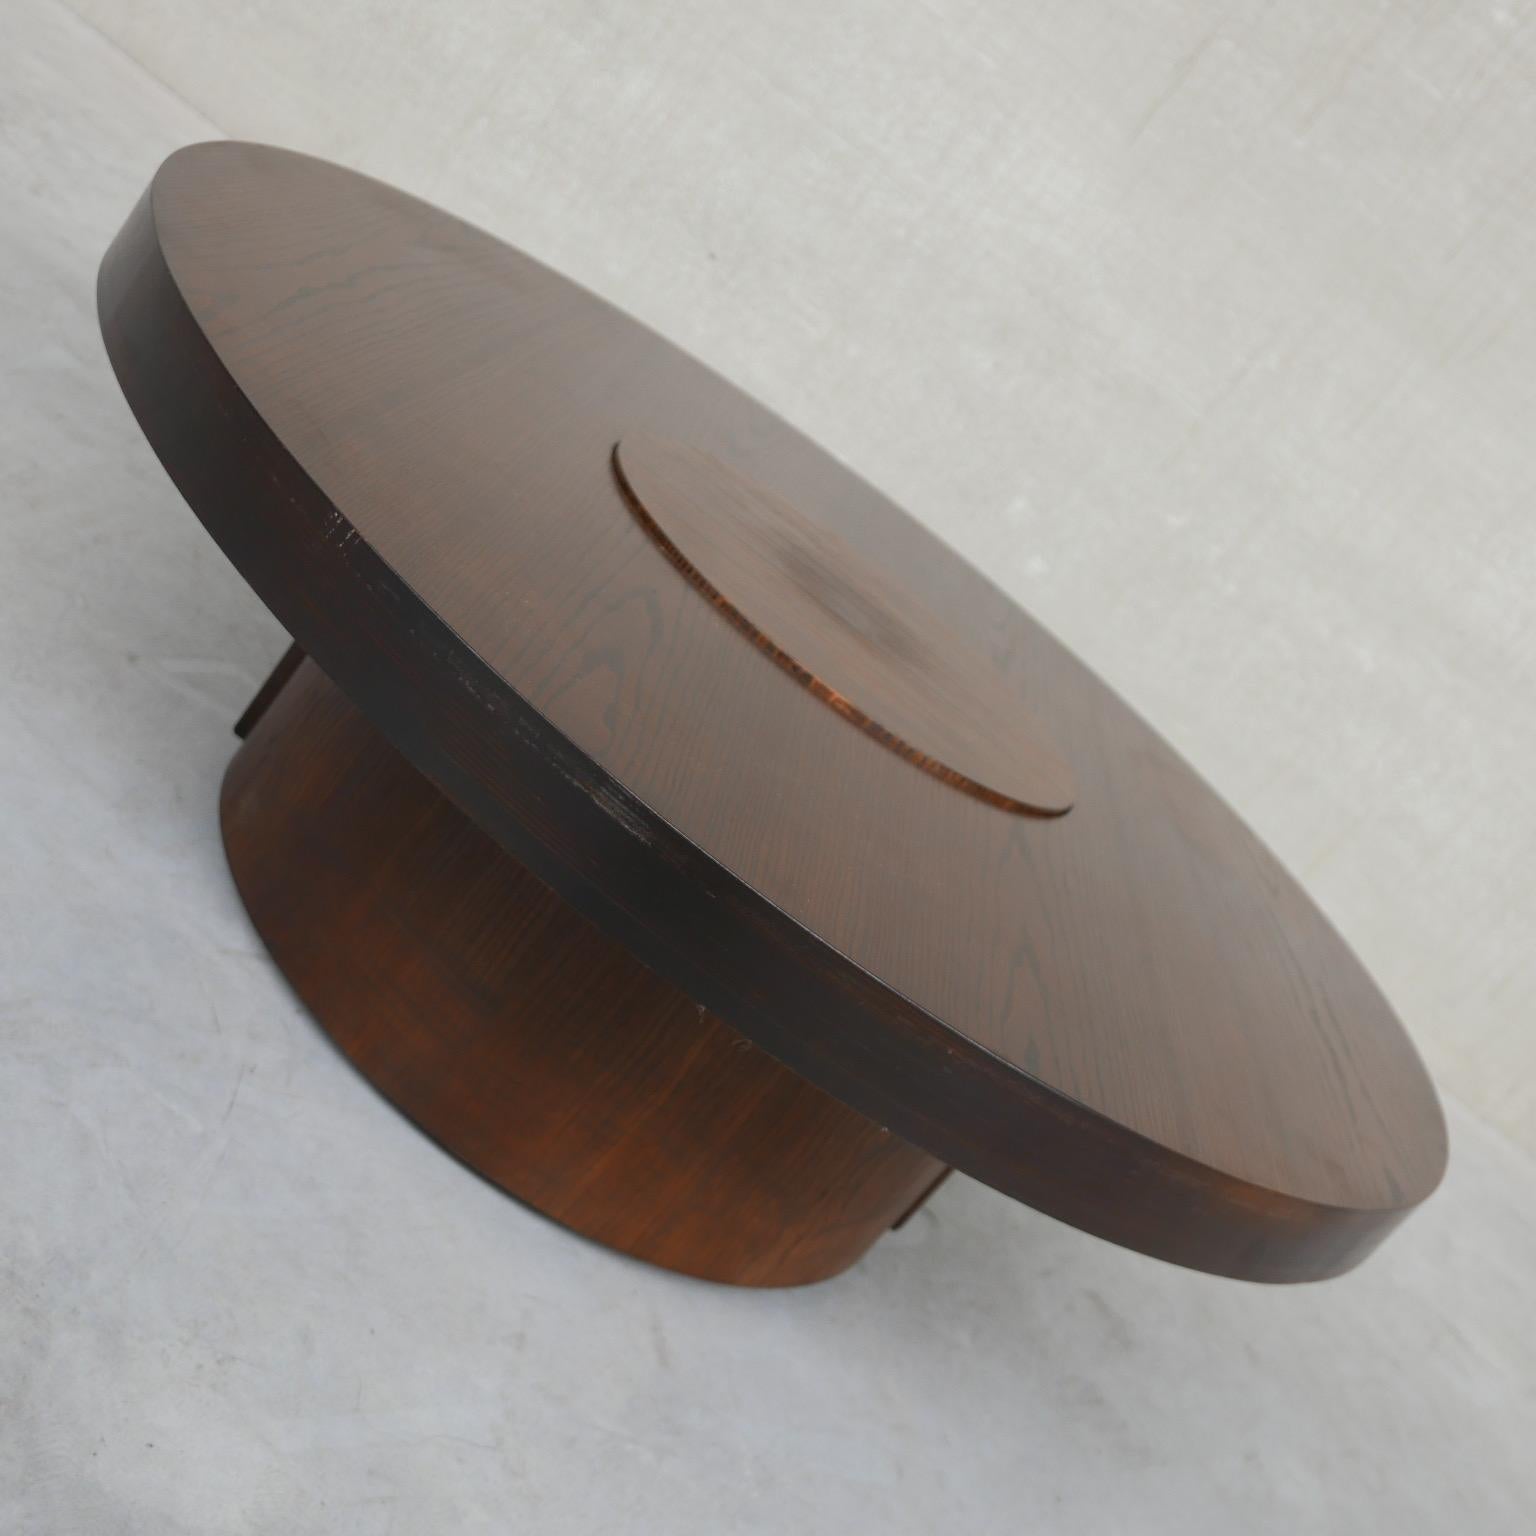 A very elegant Minimalist coffee table.

Holland, circa 1960s.

Slightly raised internal circle provides a nice contrast between the external wood.

In good condition.

Location: Belgium Gallery.

Dimensions: 110 Diameter x 38 H in